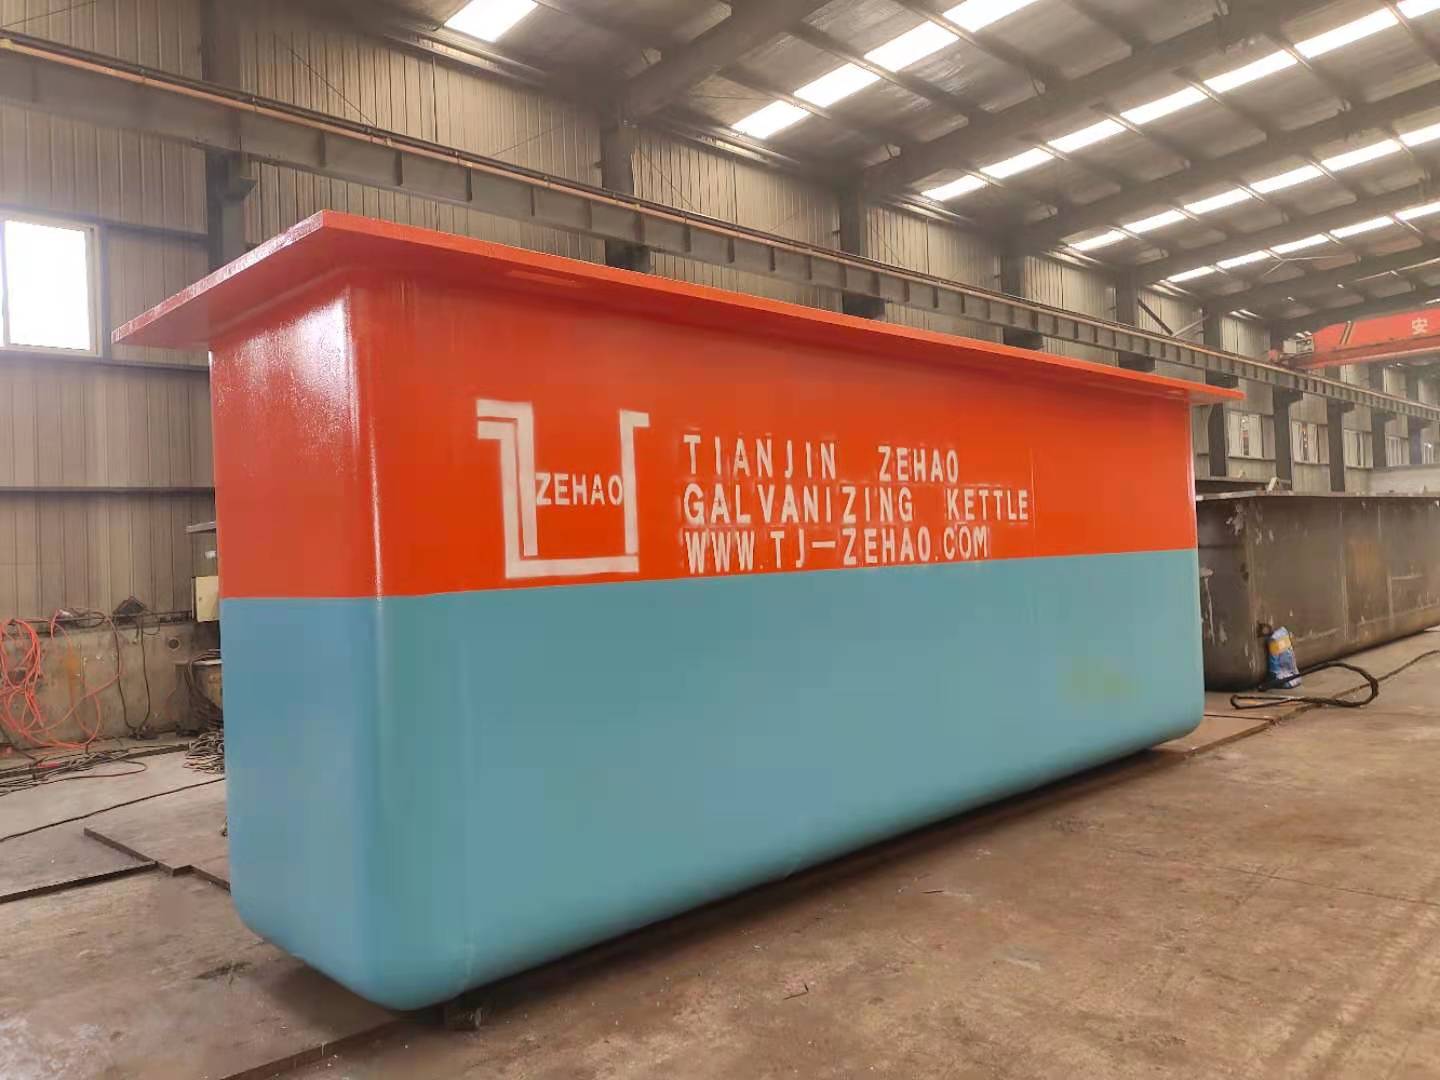 galvanizing kettle exported to Italy